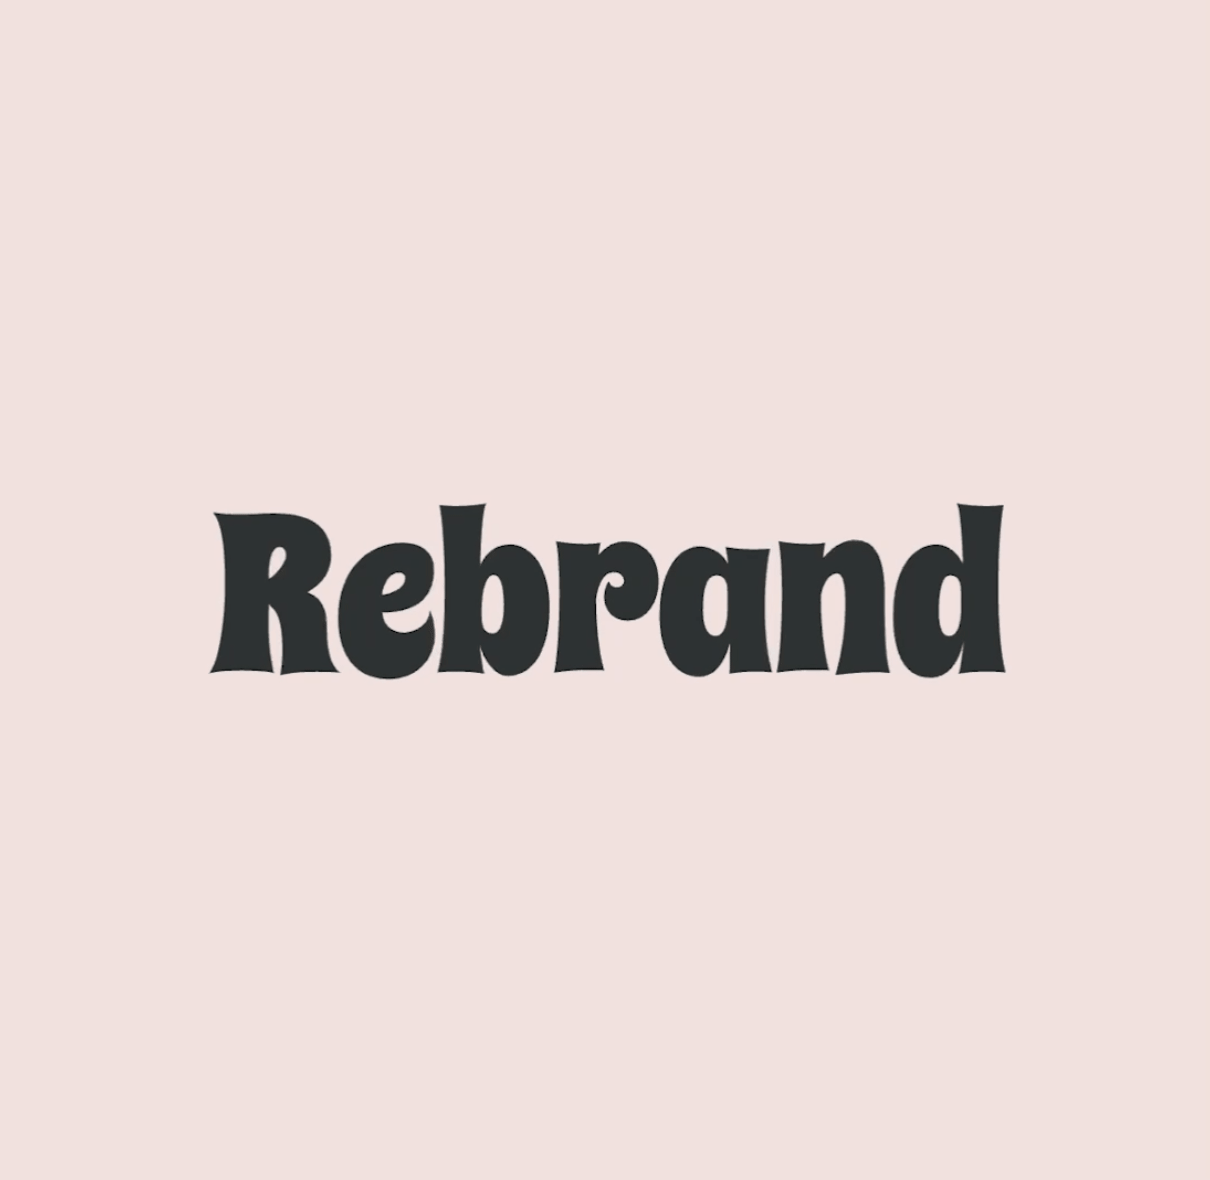 Getting your rebrand right